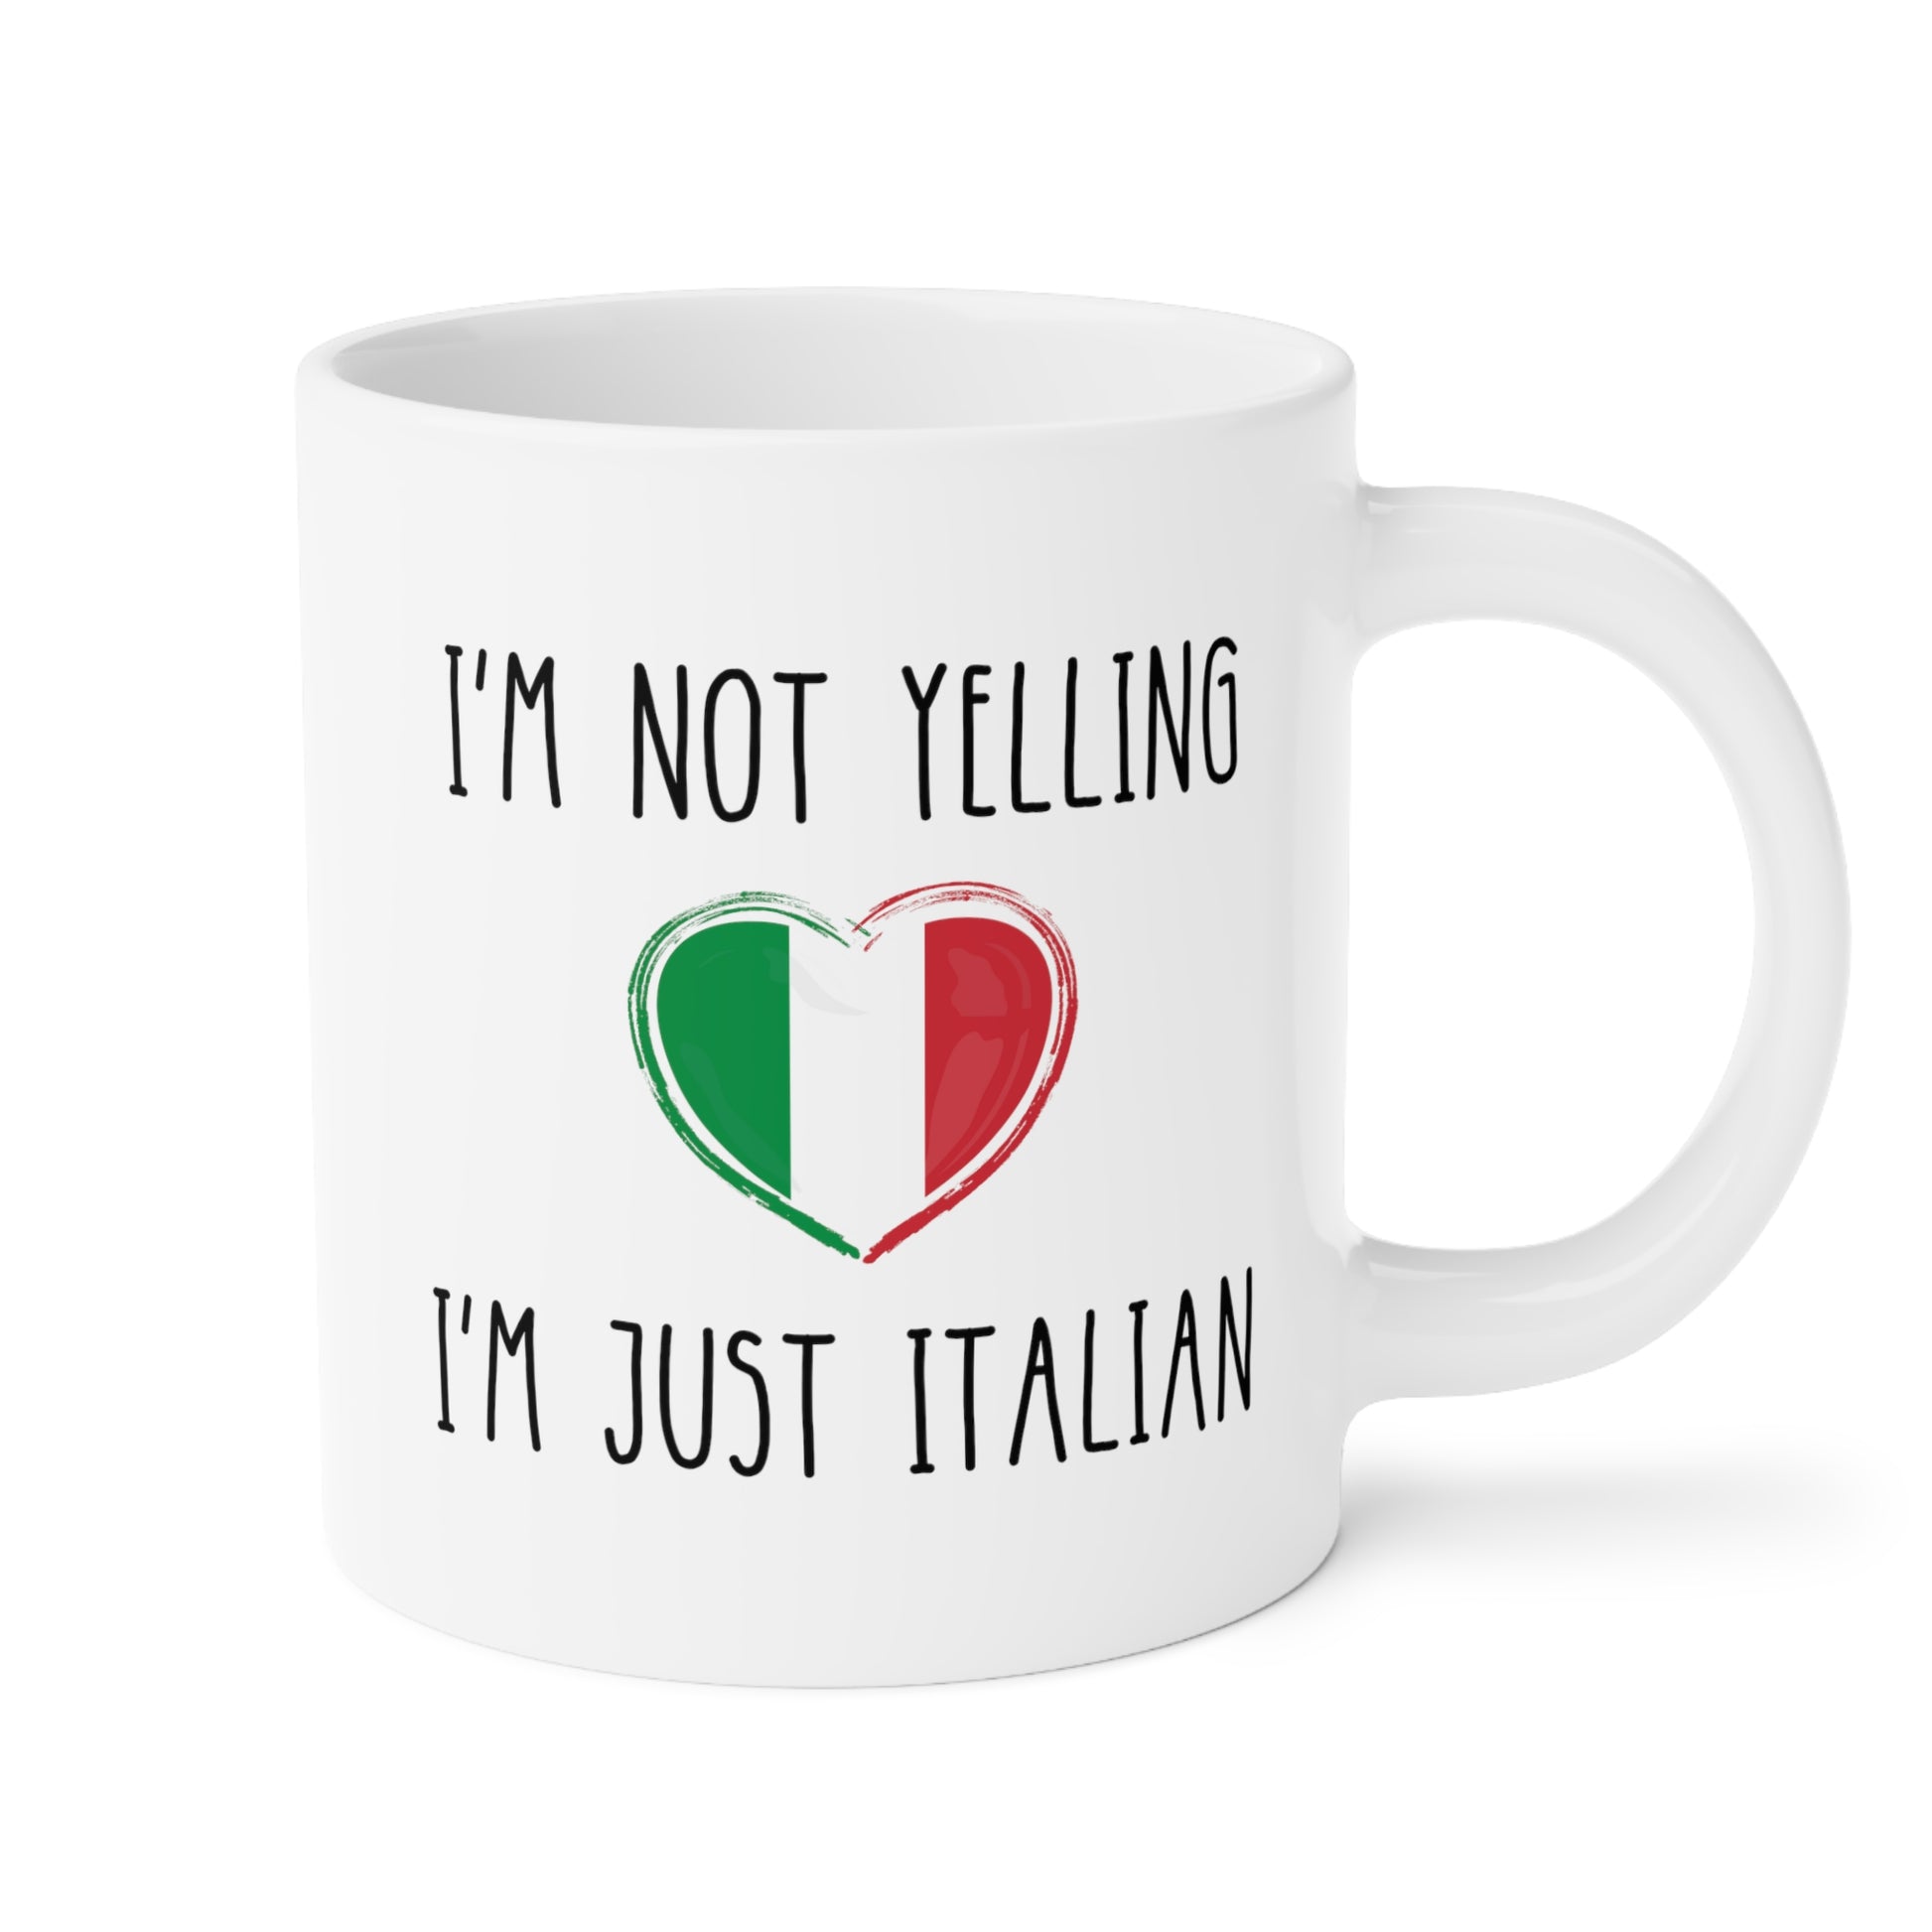 I'm Not Yelling I'm Just Italian 20oz white funny large coffee mug gift for italy love loud italiana italiano waveywares wavey wares wavywares wavy wares